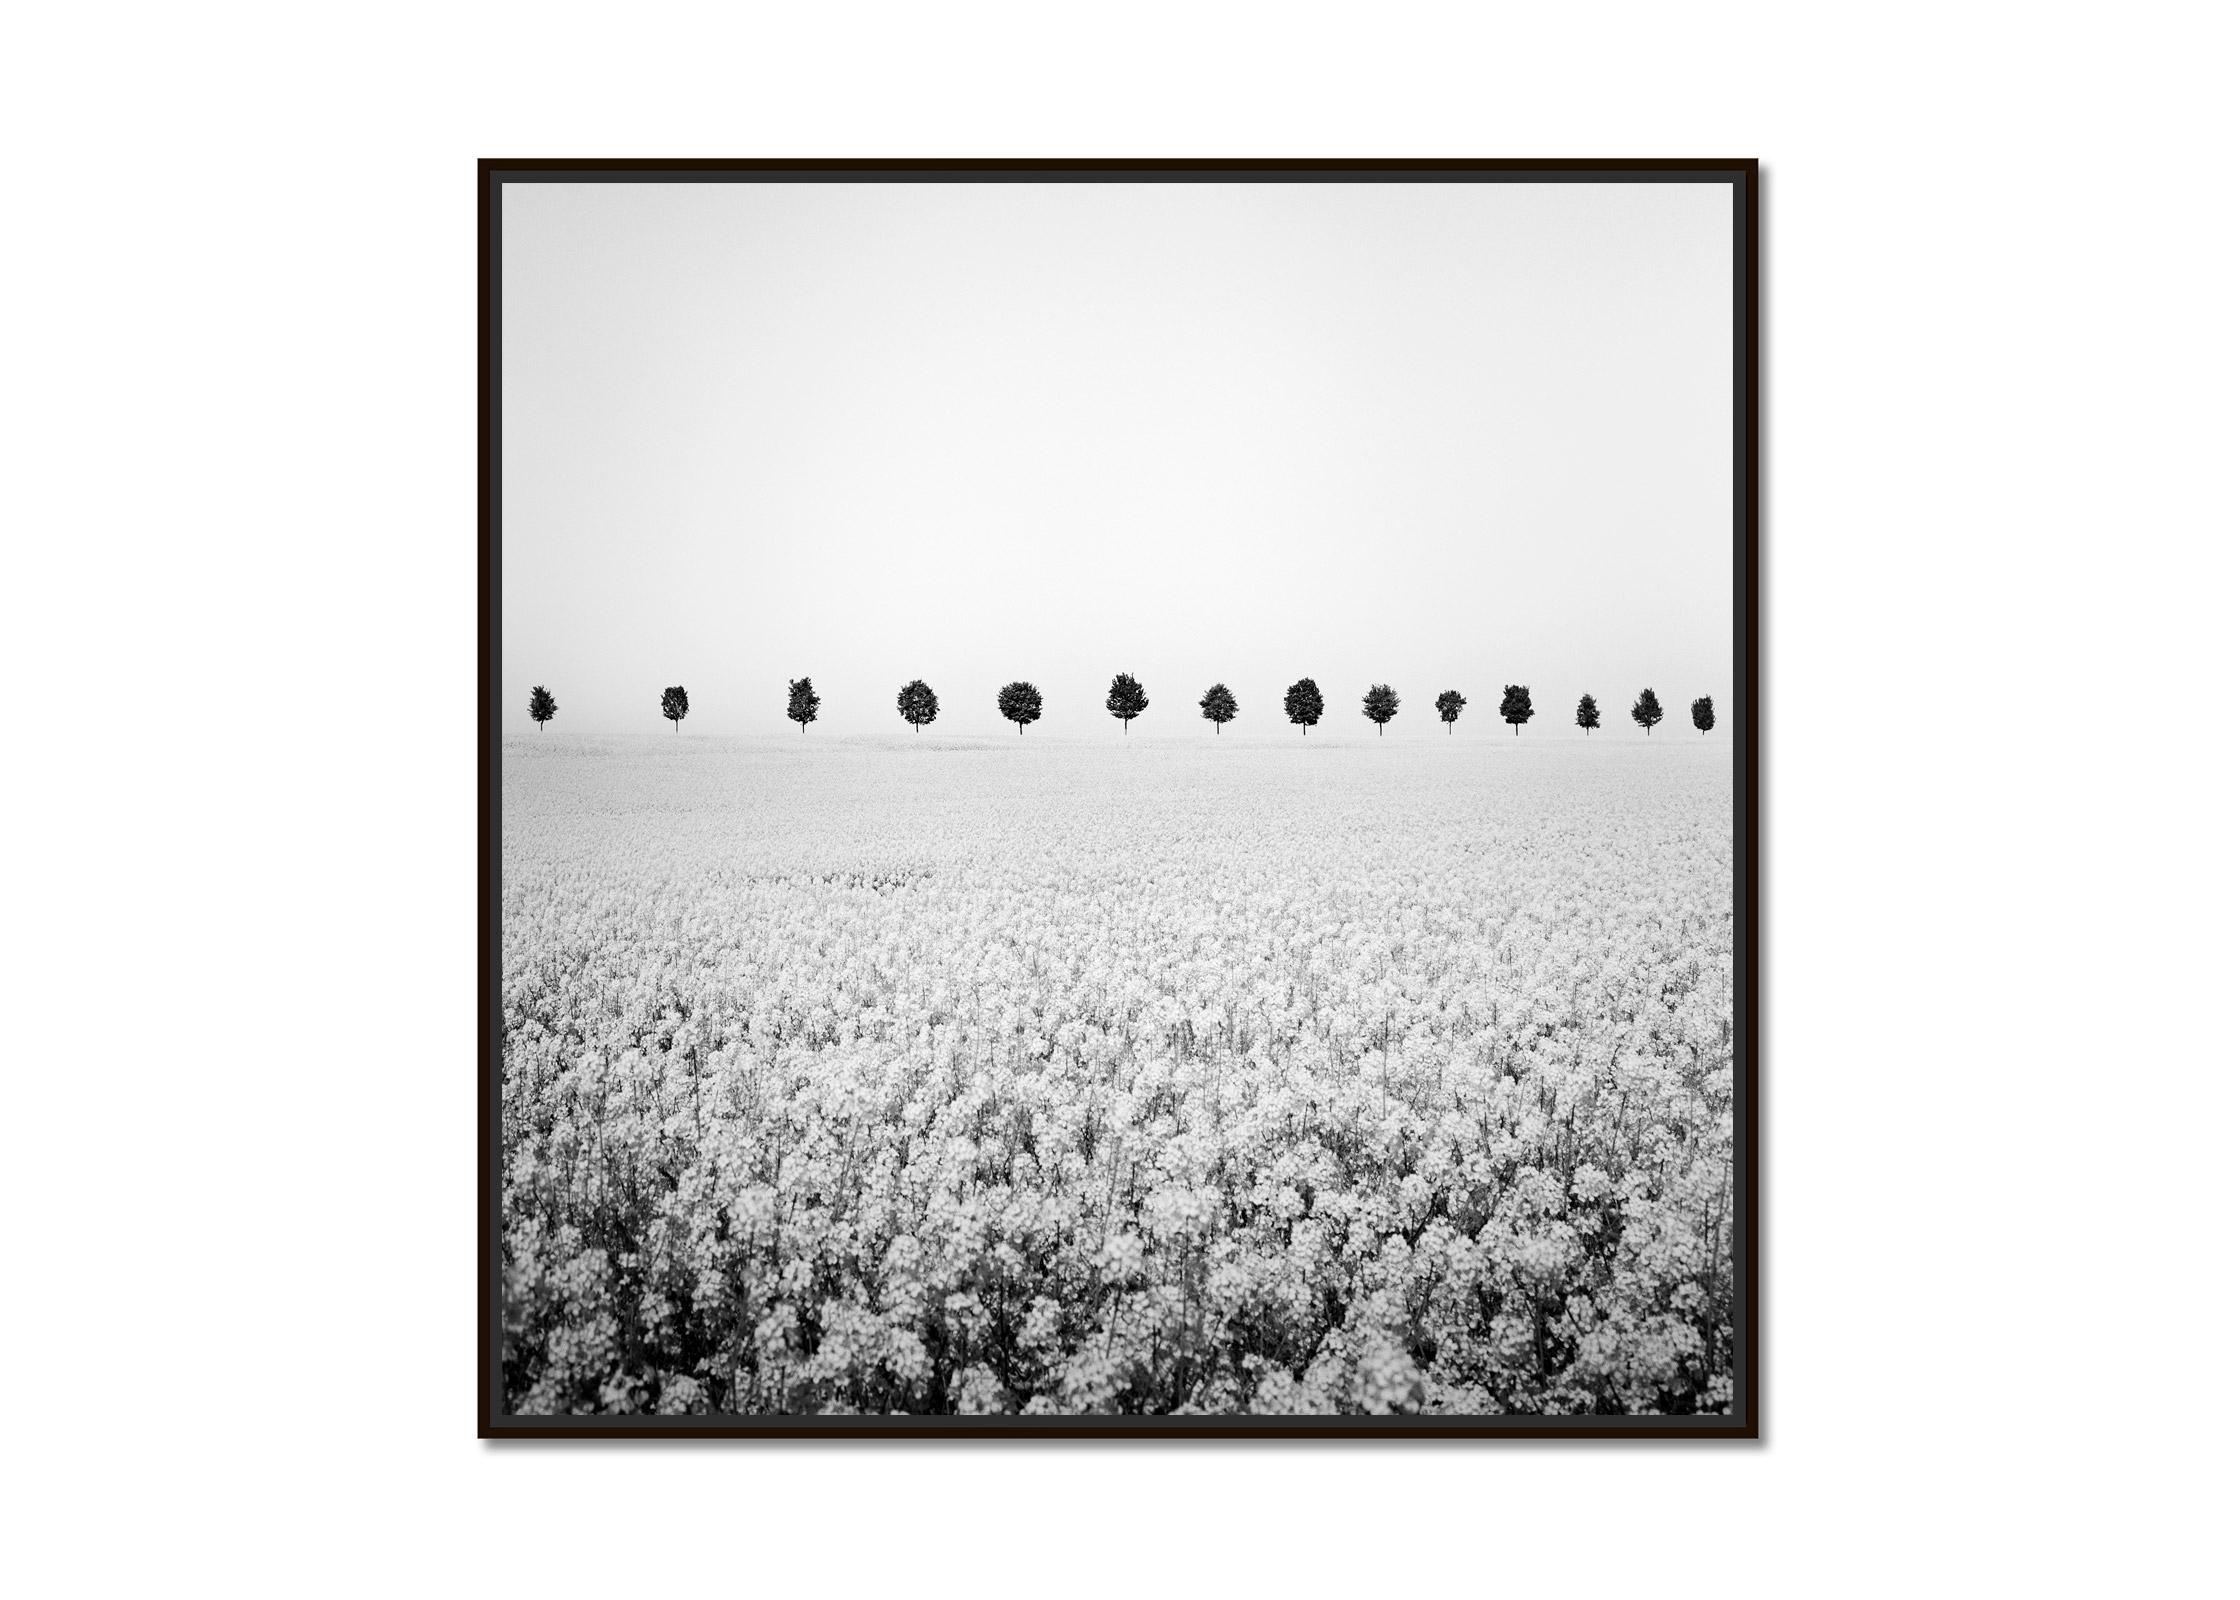 Brassica Napus, Tree Avenue, Rapeseed Field, black and white art photography - Photograph by Gerald Berghammer